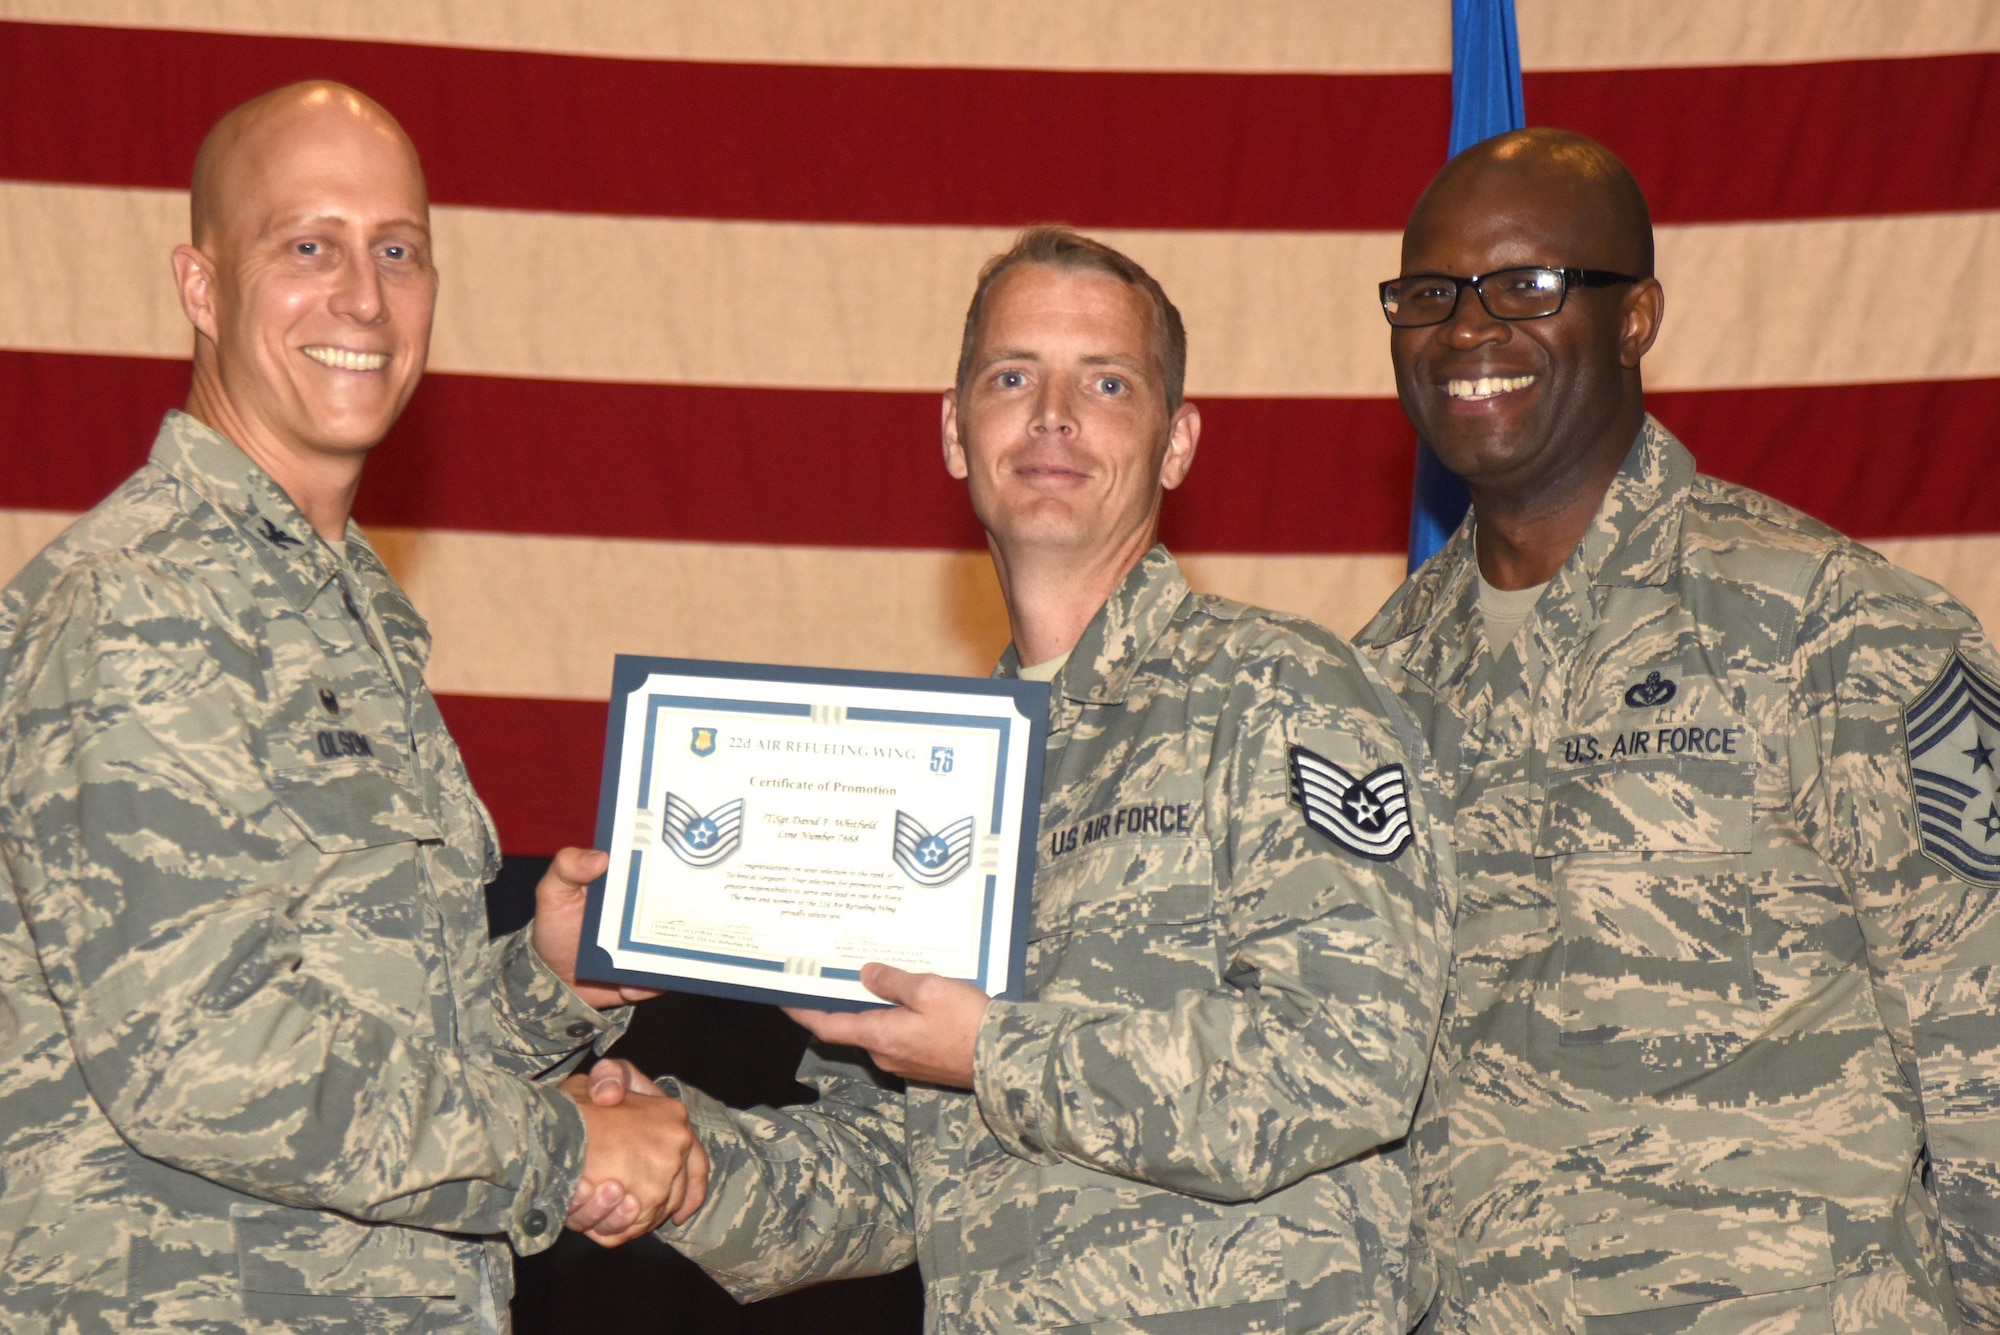 Forty-four 22nd Air Refueling Wing Airmen were recognized for their selection to technical sergeant during a technical sergeant release party, July 20, 2017, at McConnell Air Force Base, Kan. Technical Sergeants continuously strive to further their development as technicians, supervisors and leaders. (U.S. Air Force photo/Airman 1st Class Alan Ricker)